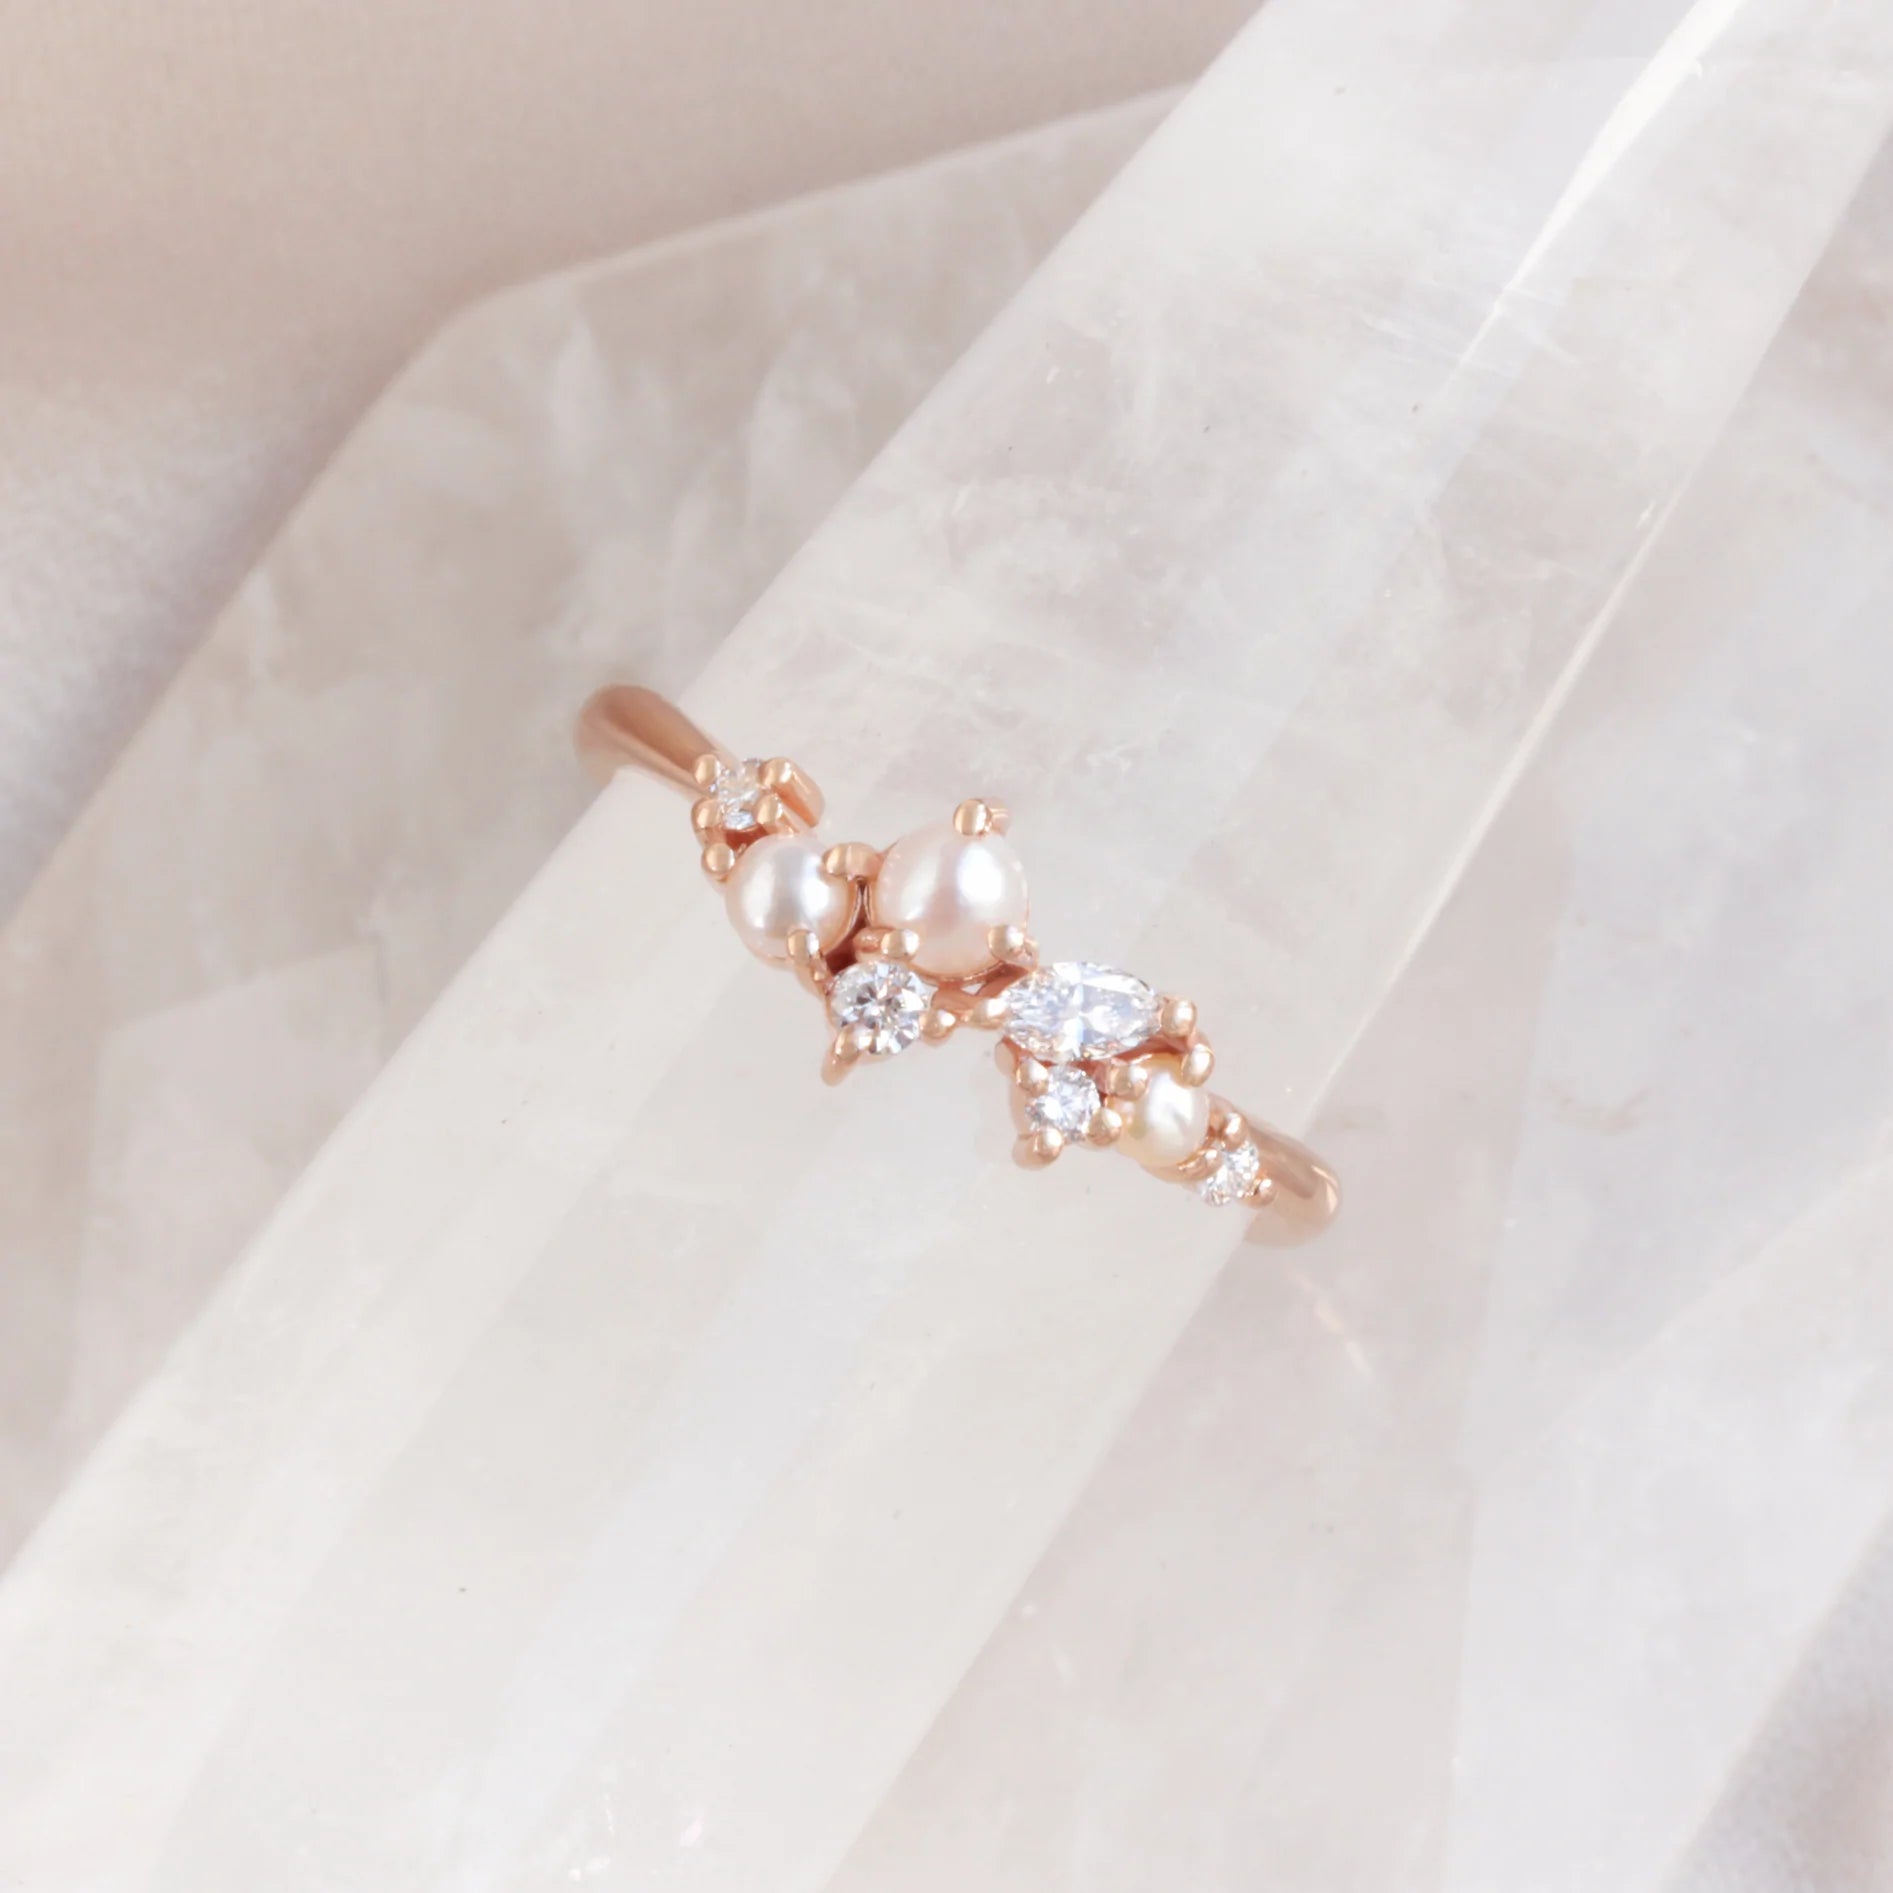 Pearls & Diamonds Wedding Band - Evi, 14K Rose Gold, Size 6.5, READY TO SHIP! ♥